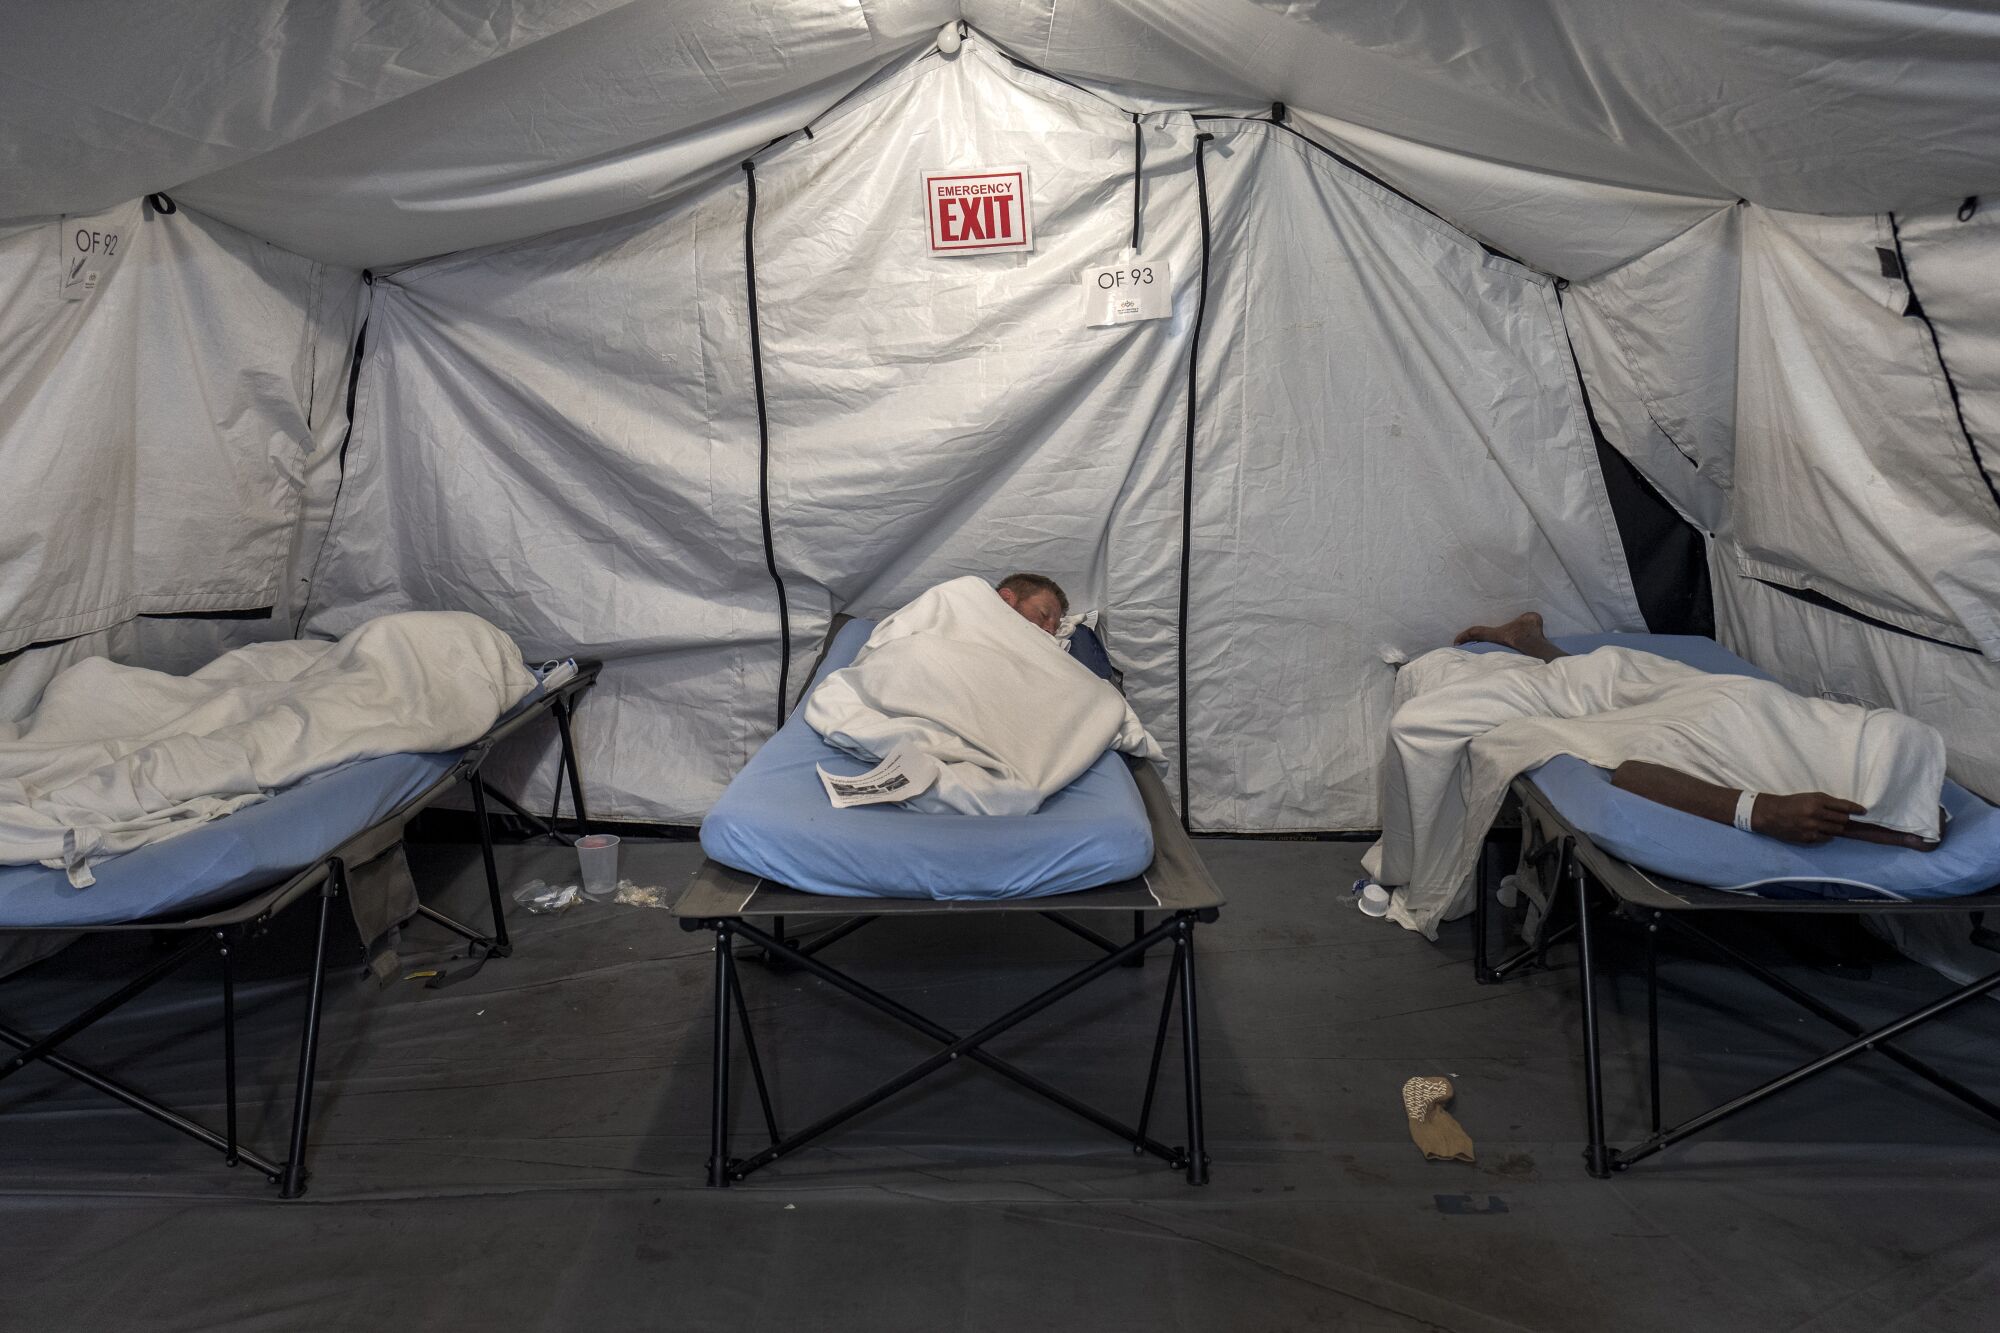 Patients sleep on cots in a tent.